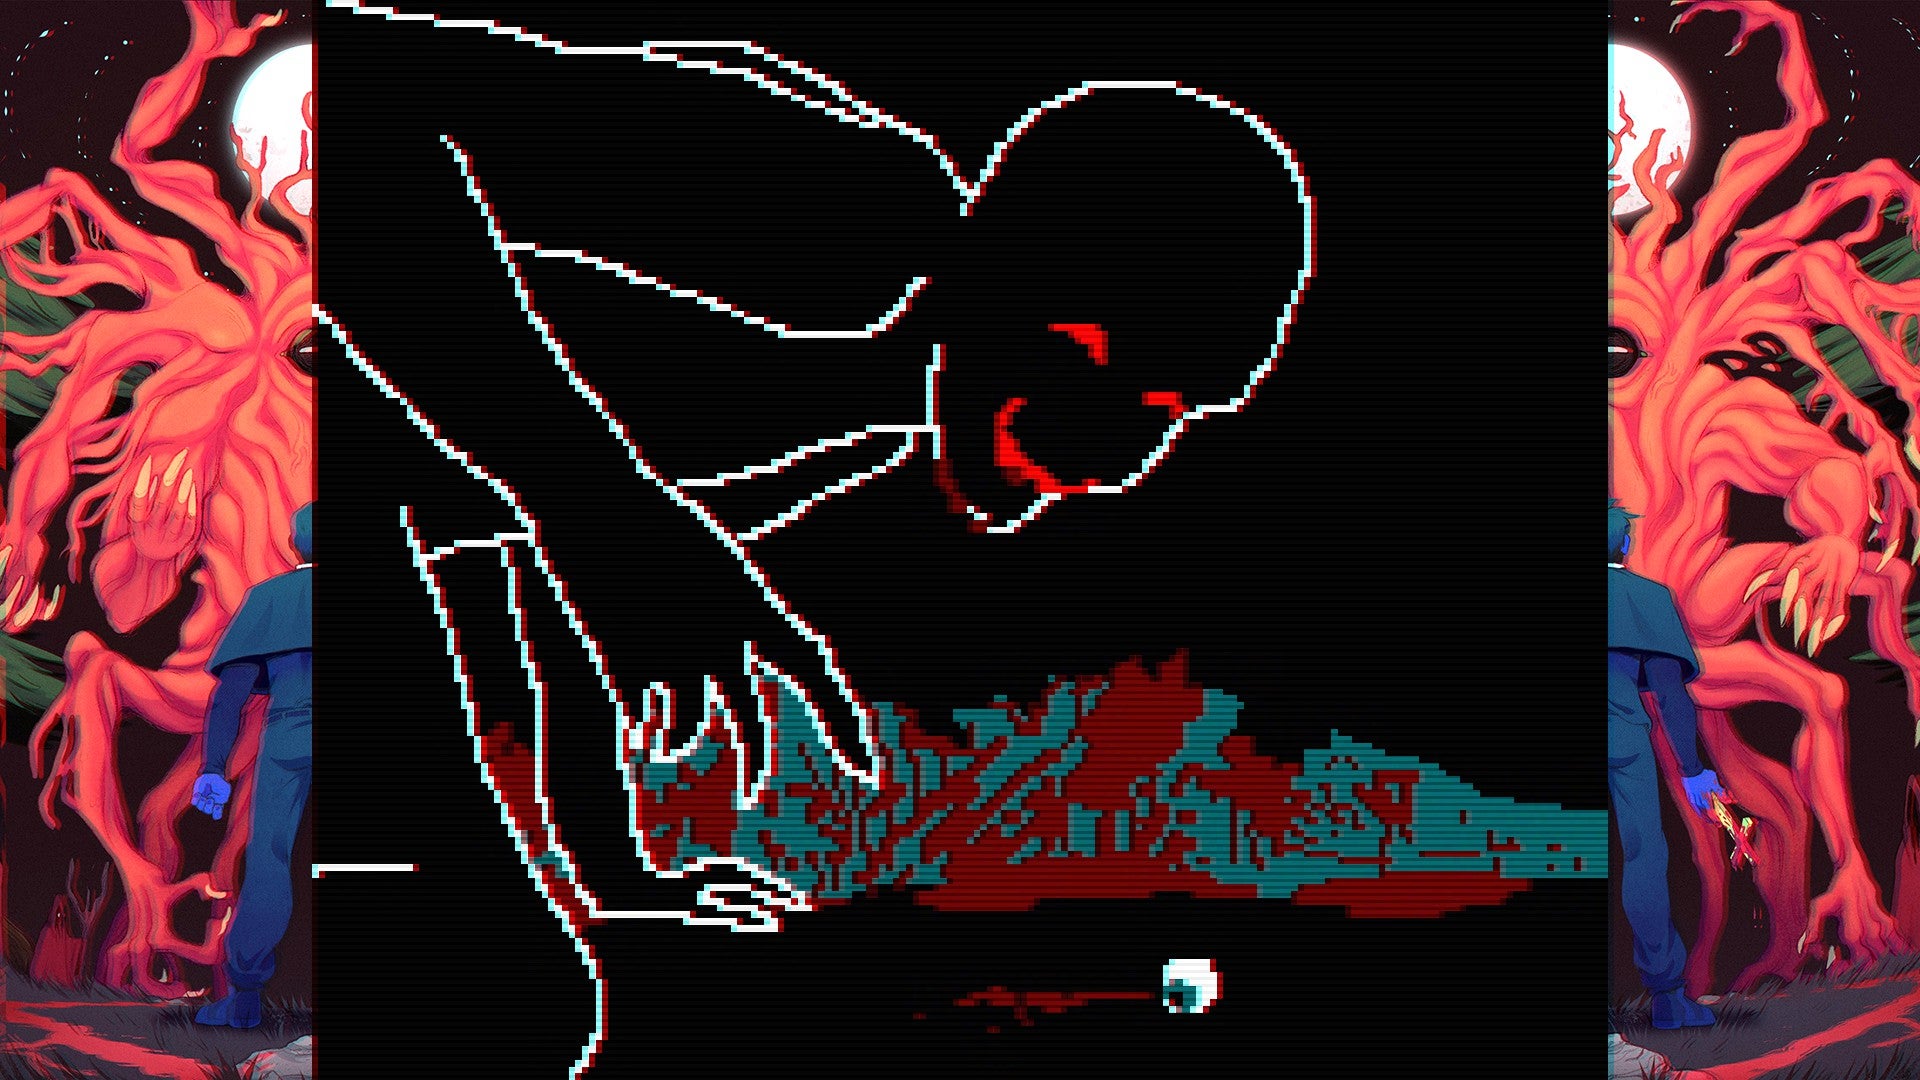 A creepy image. The outline of a humanoid creature with red eyes and blood dripping from its mouth, turning to the viewer. It is on its hands and knees eating a body. An eyeball sits on the floor nearby.